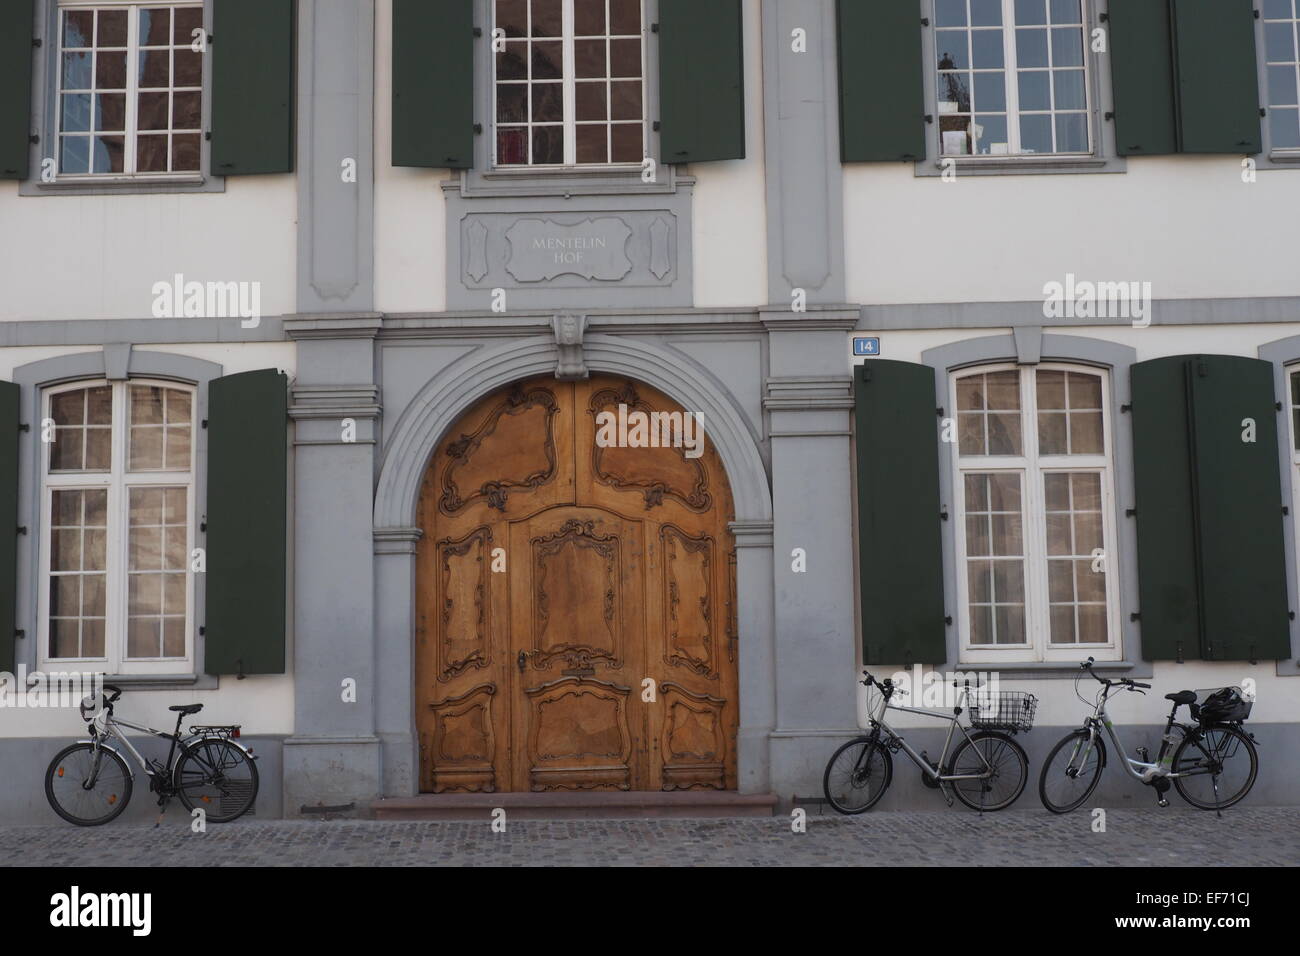 Bicycles parked alongside an ornate building. Stock Photo